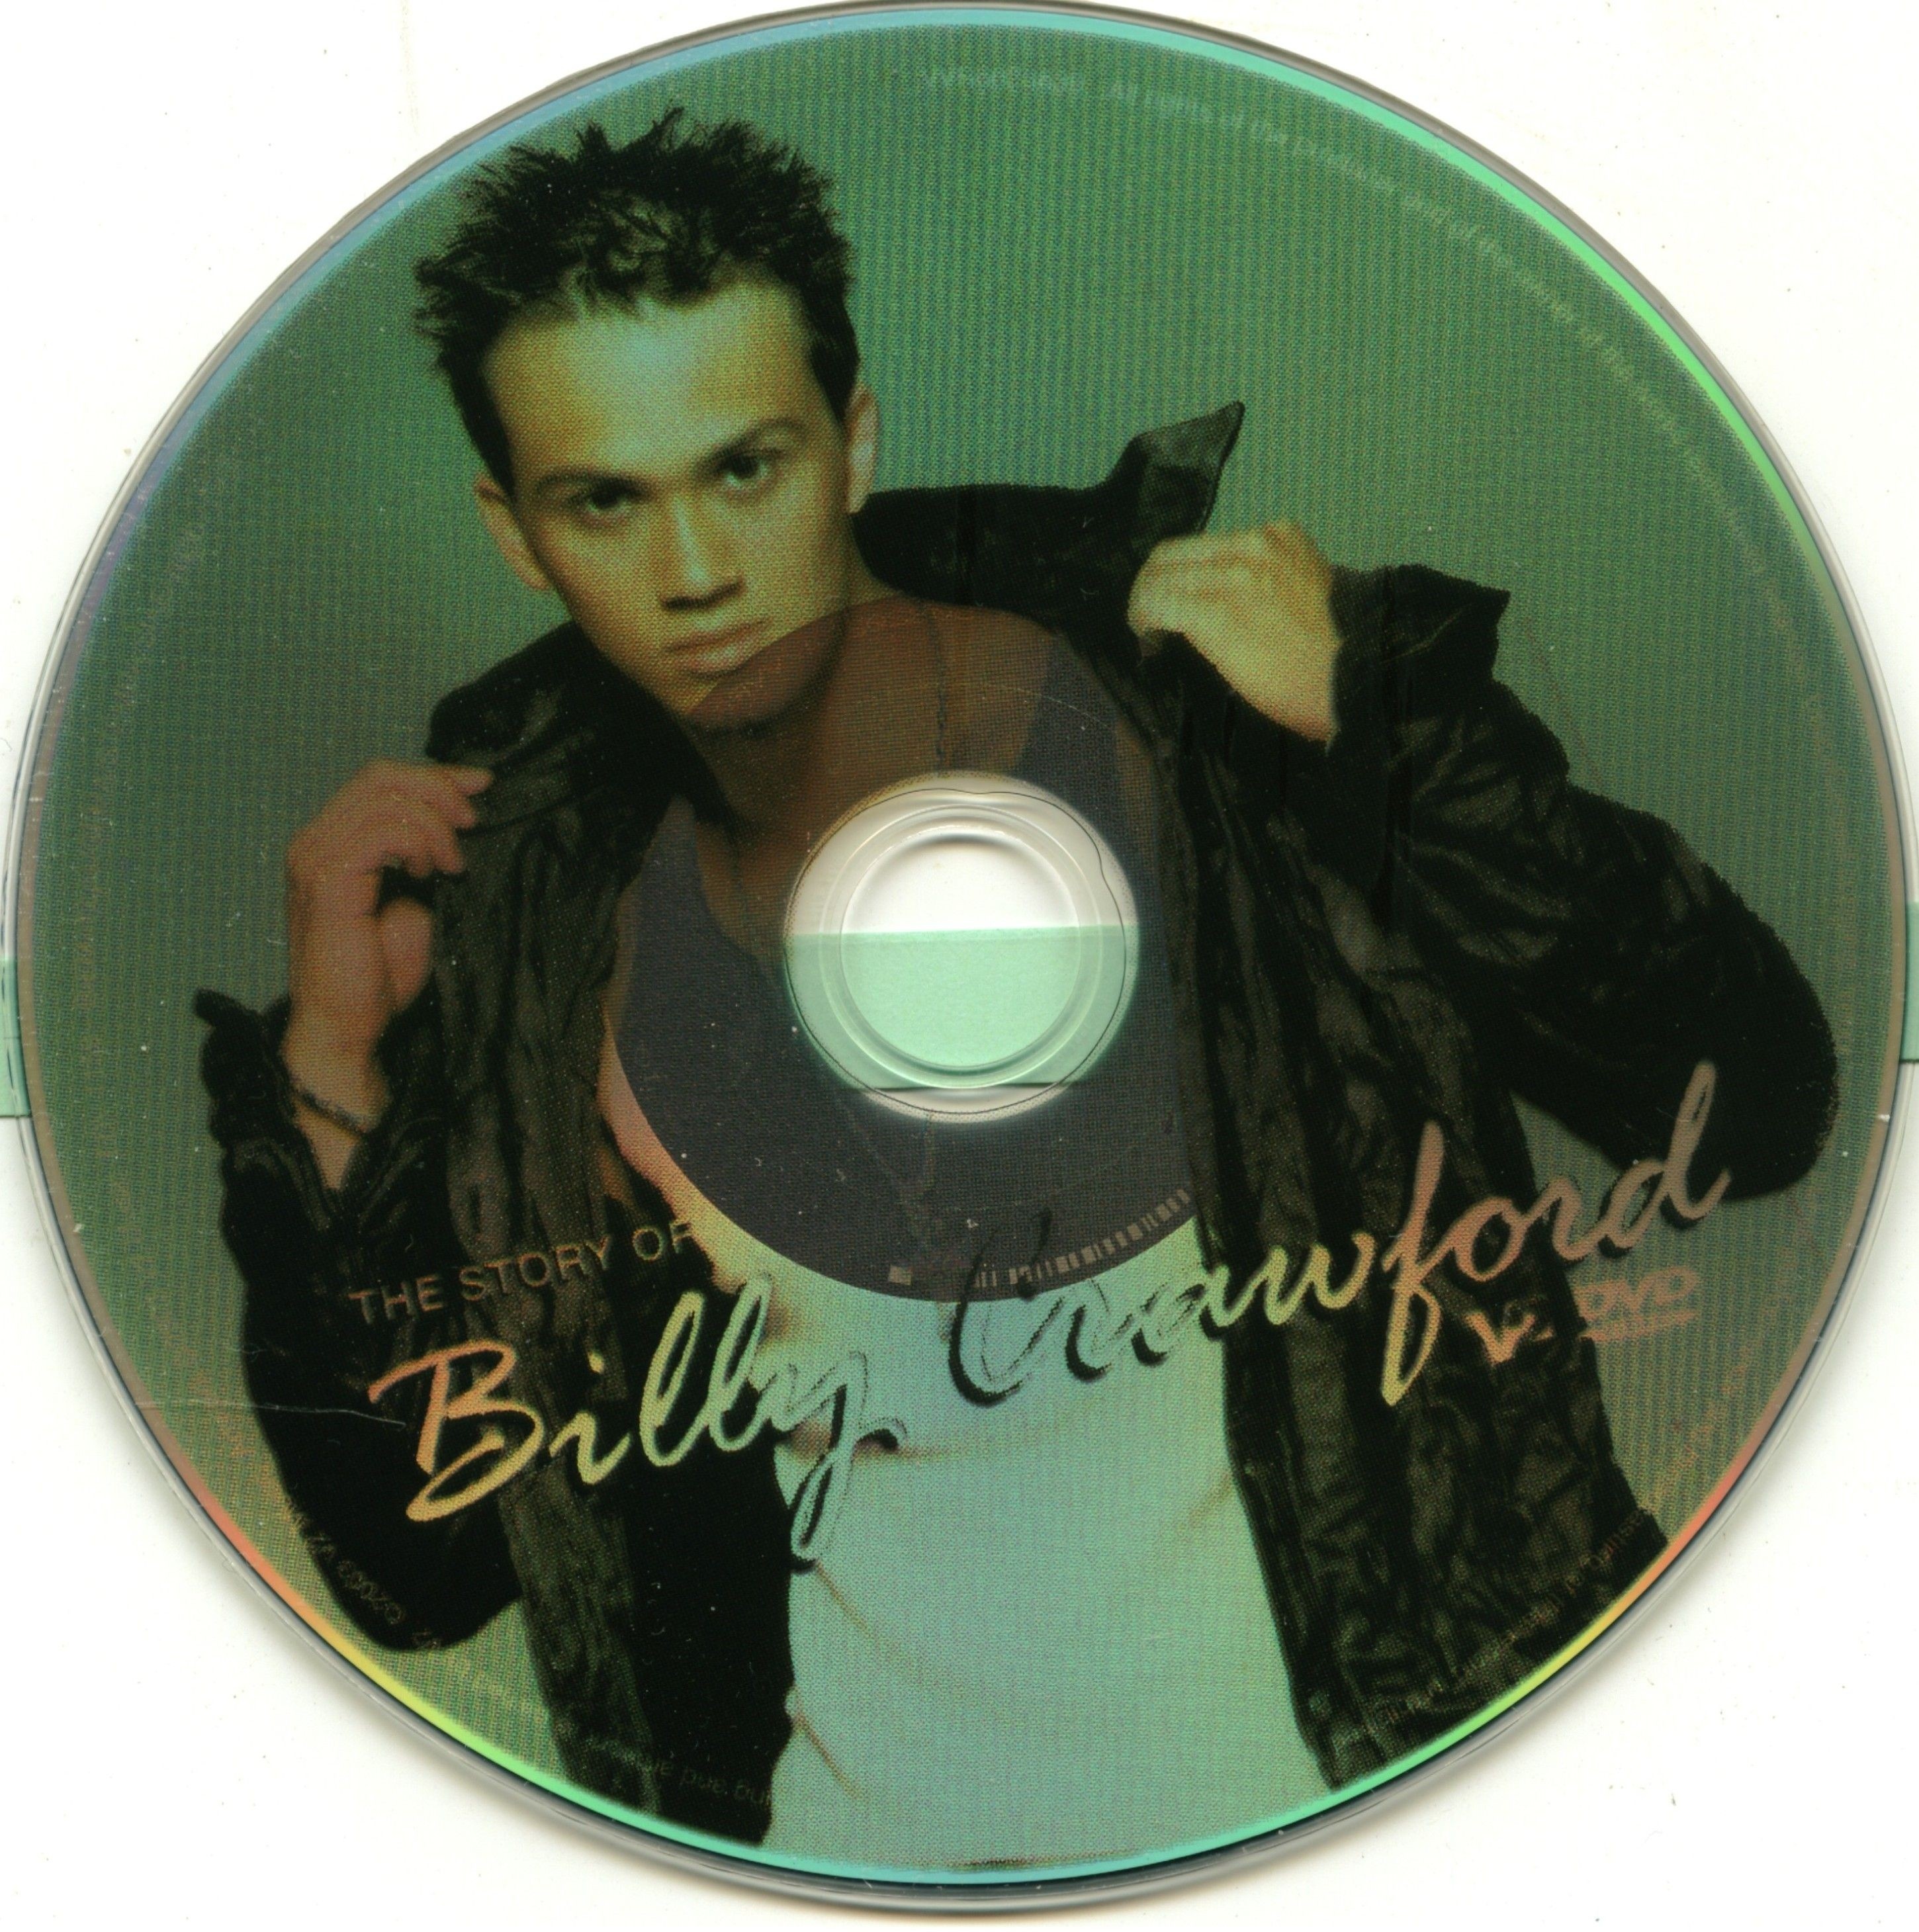 Billy Crawford The story of